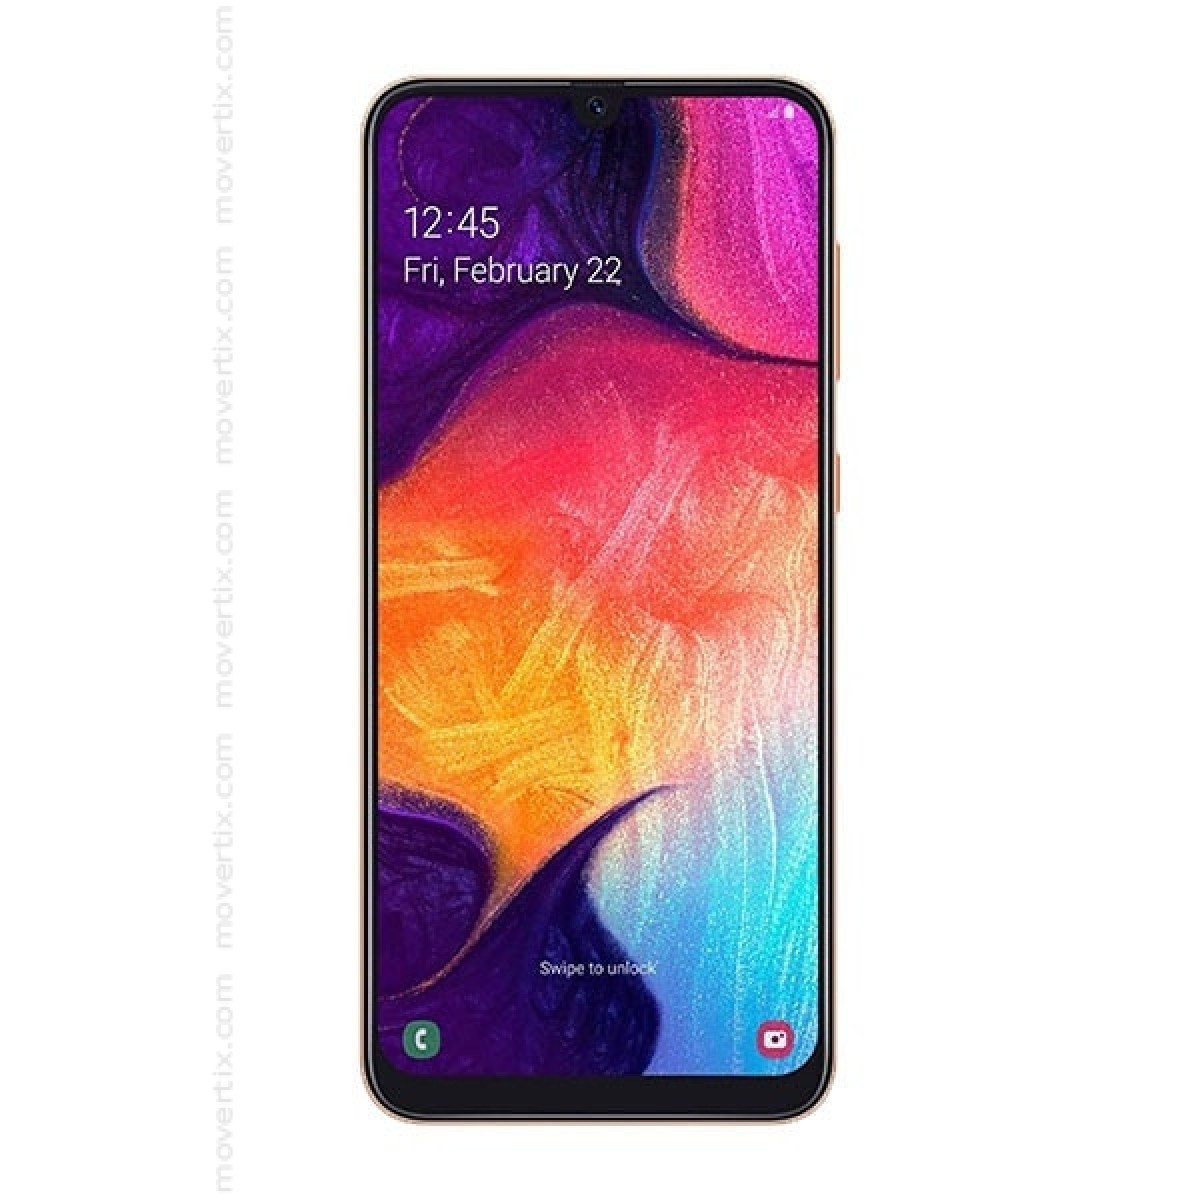 how to locate cell phone Samsung Galaxy A50